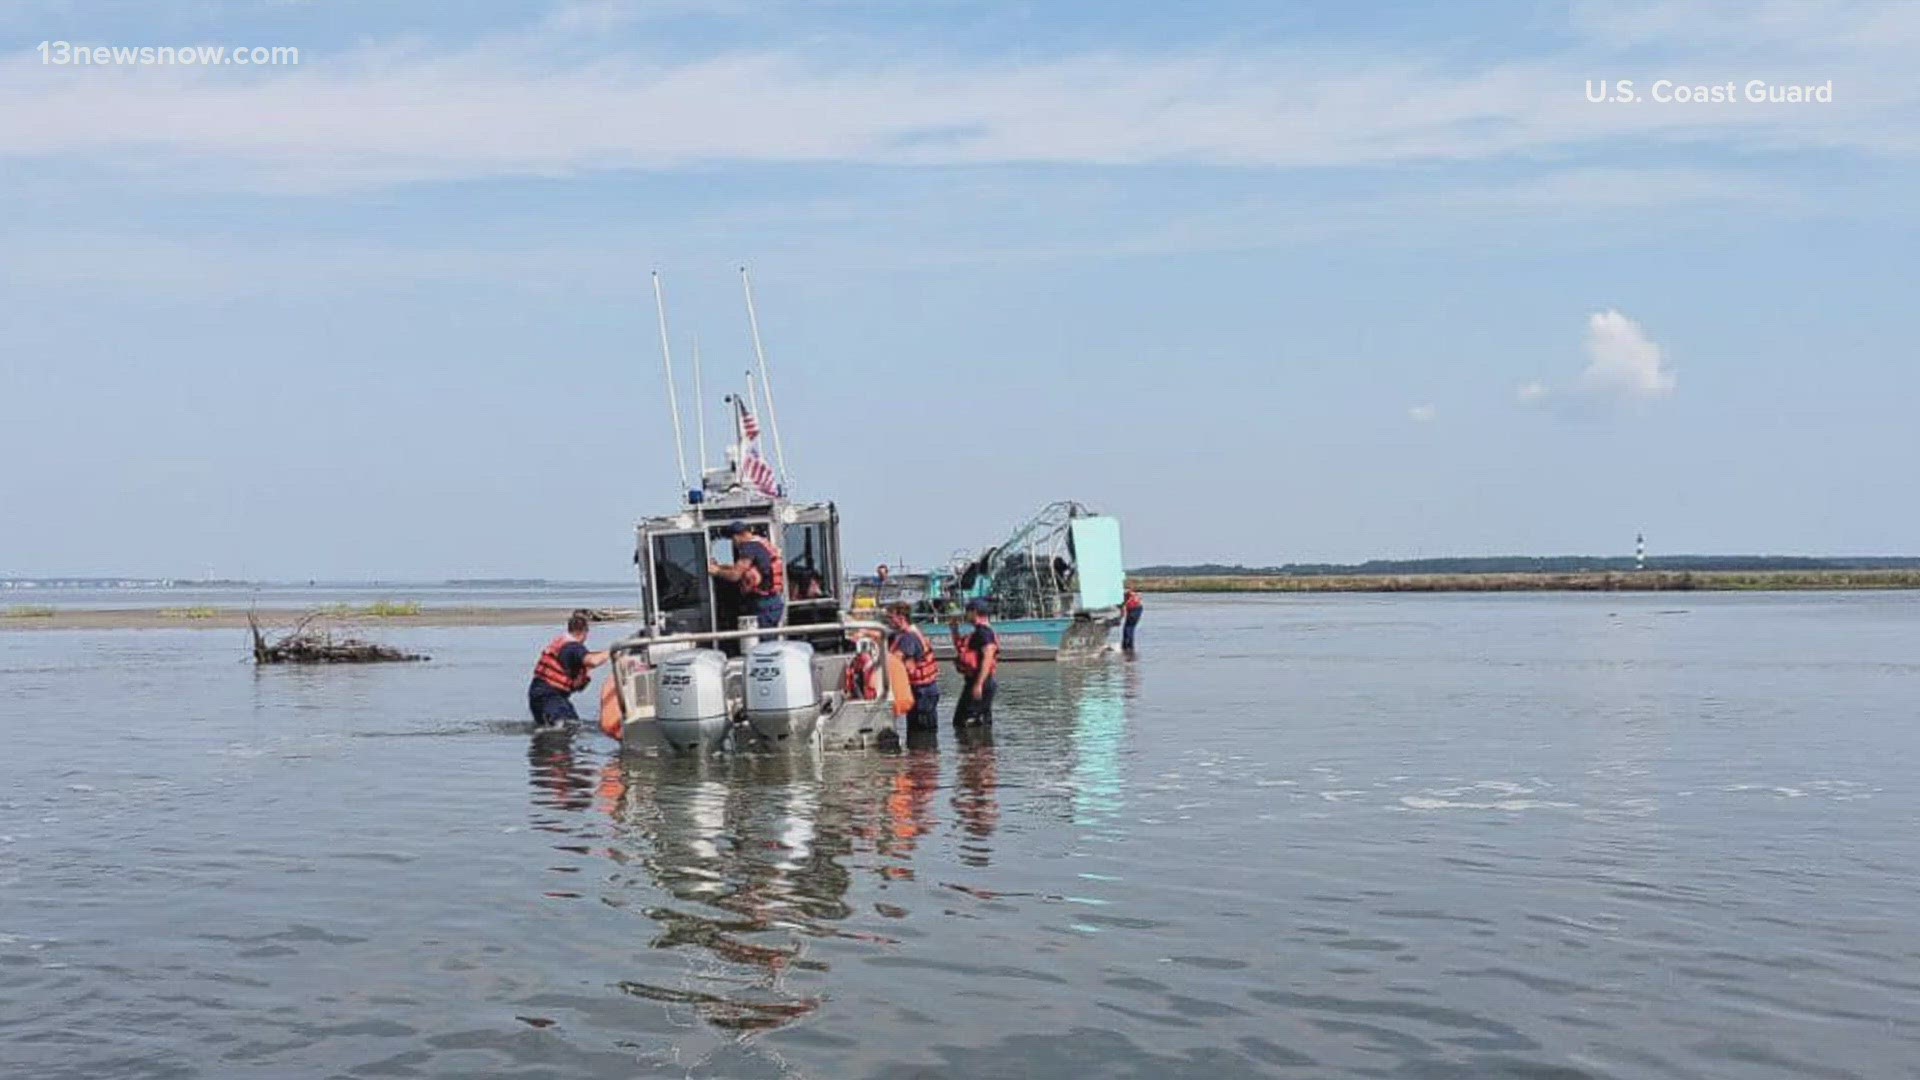 Coast Guard crews rescued almost a dozen people near North Carolina's Oregon Inlet this morning.